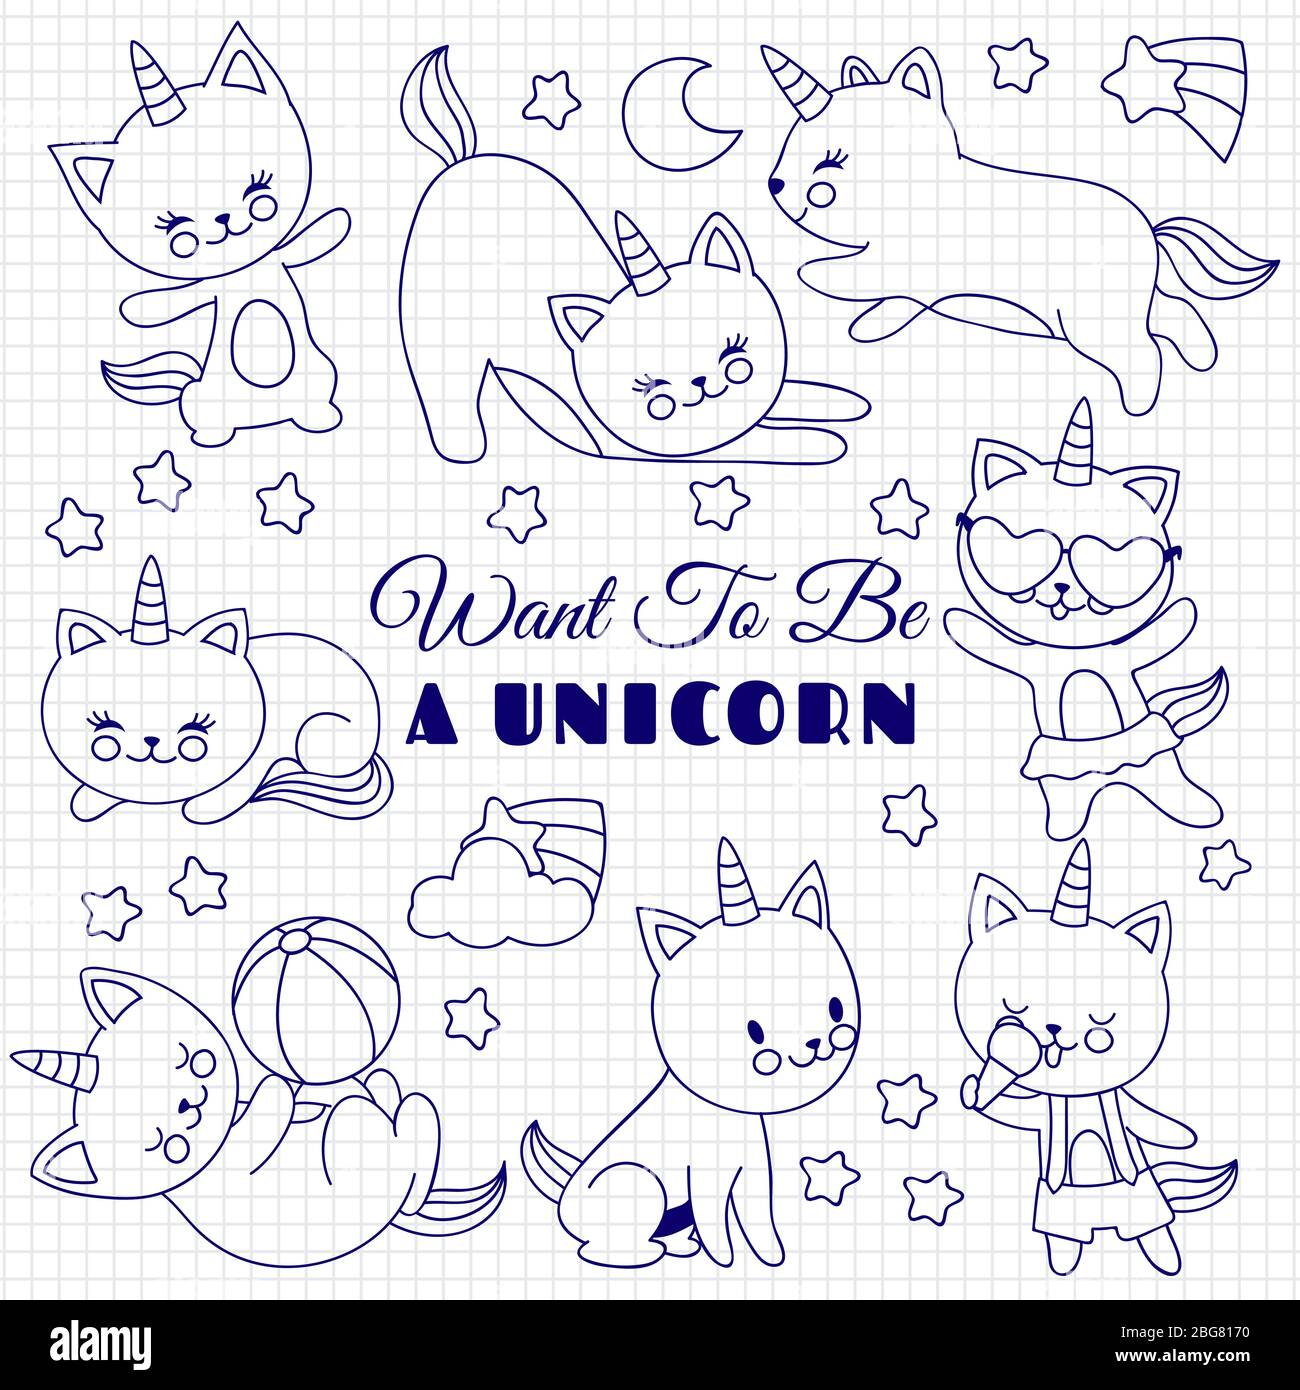 Cute cats like unicorn vector set. Cartoon kittens on school notebook page. Illustration of unicorn cat drawing, funny animal smile Stock Vector